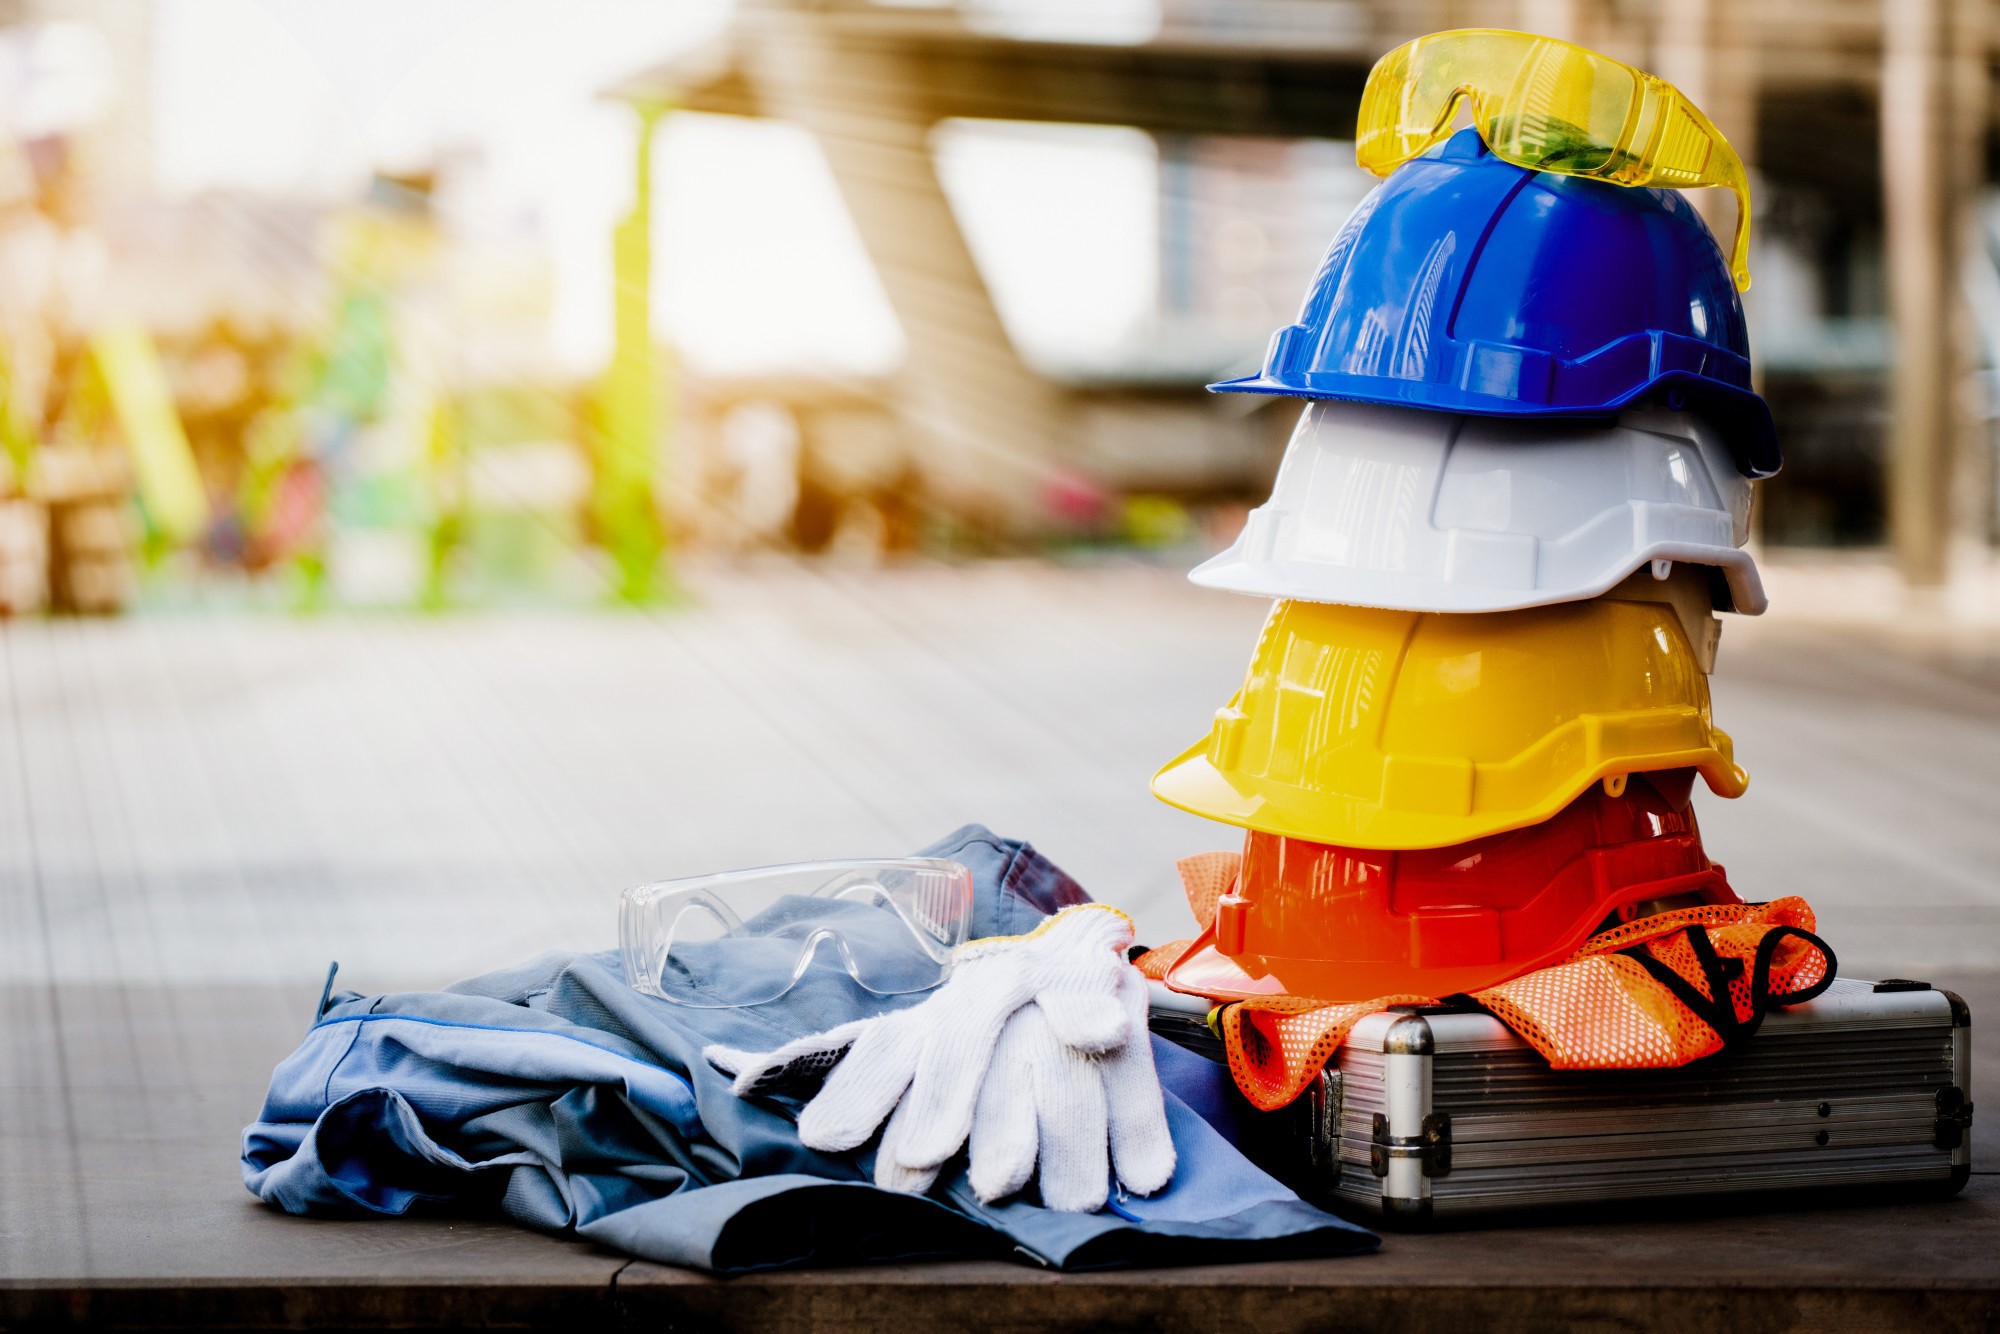 5 Tips to Improve the Safety of Your Work Site